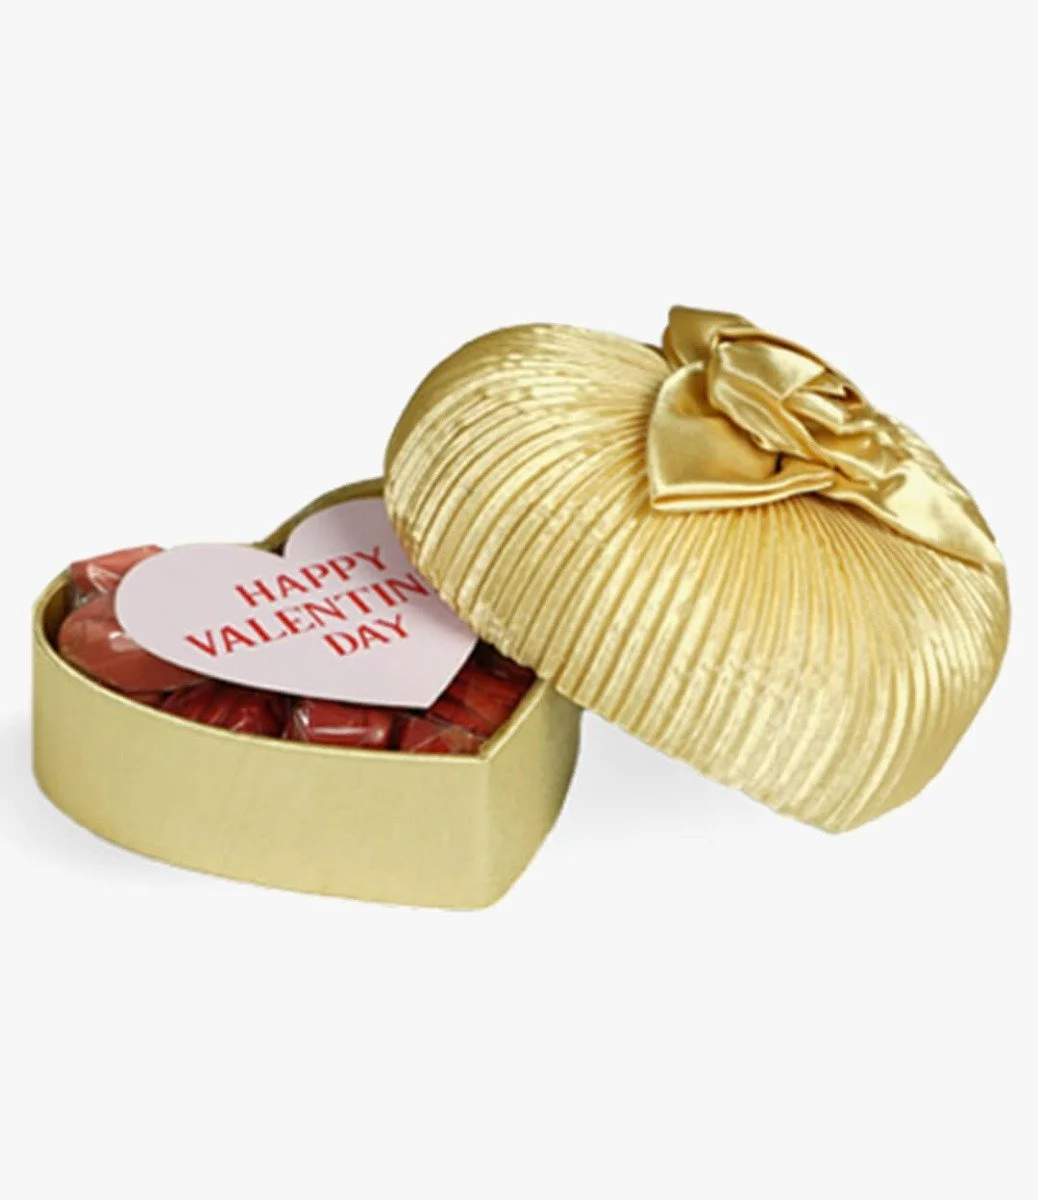 Heart of Gold - Chocolate Gift By Blessing